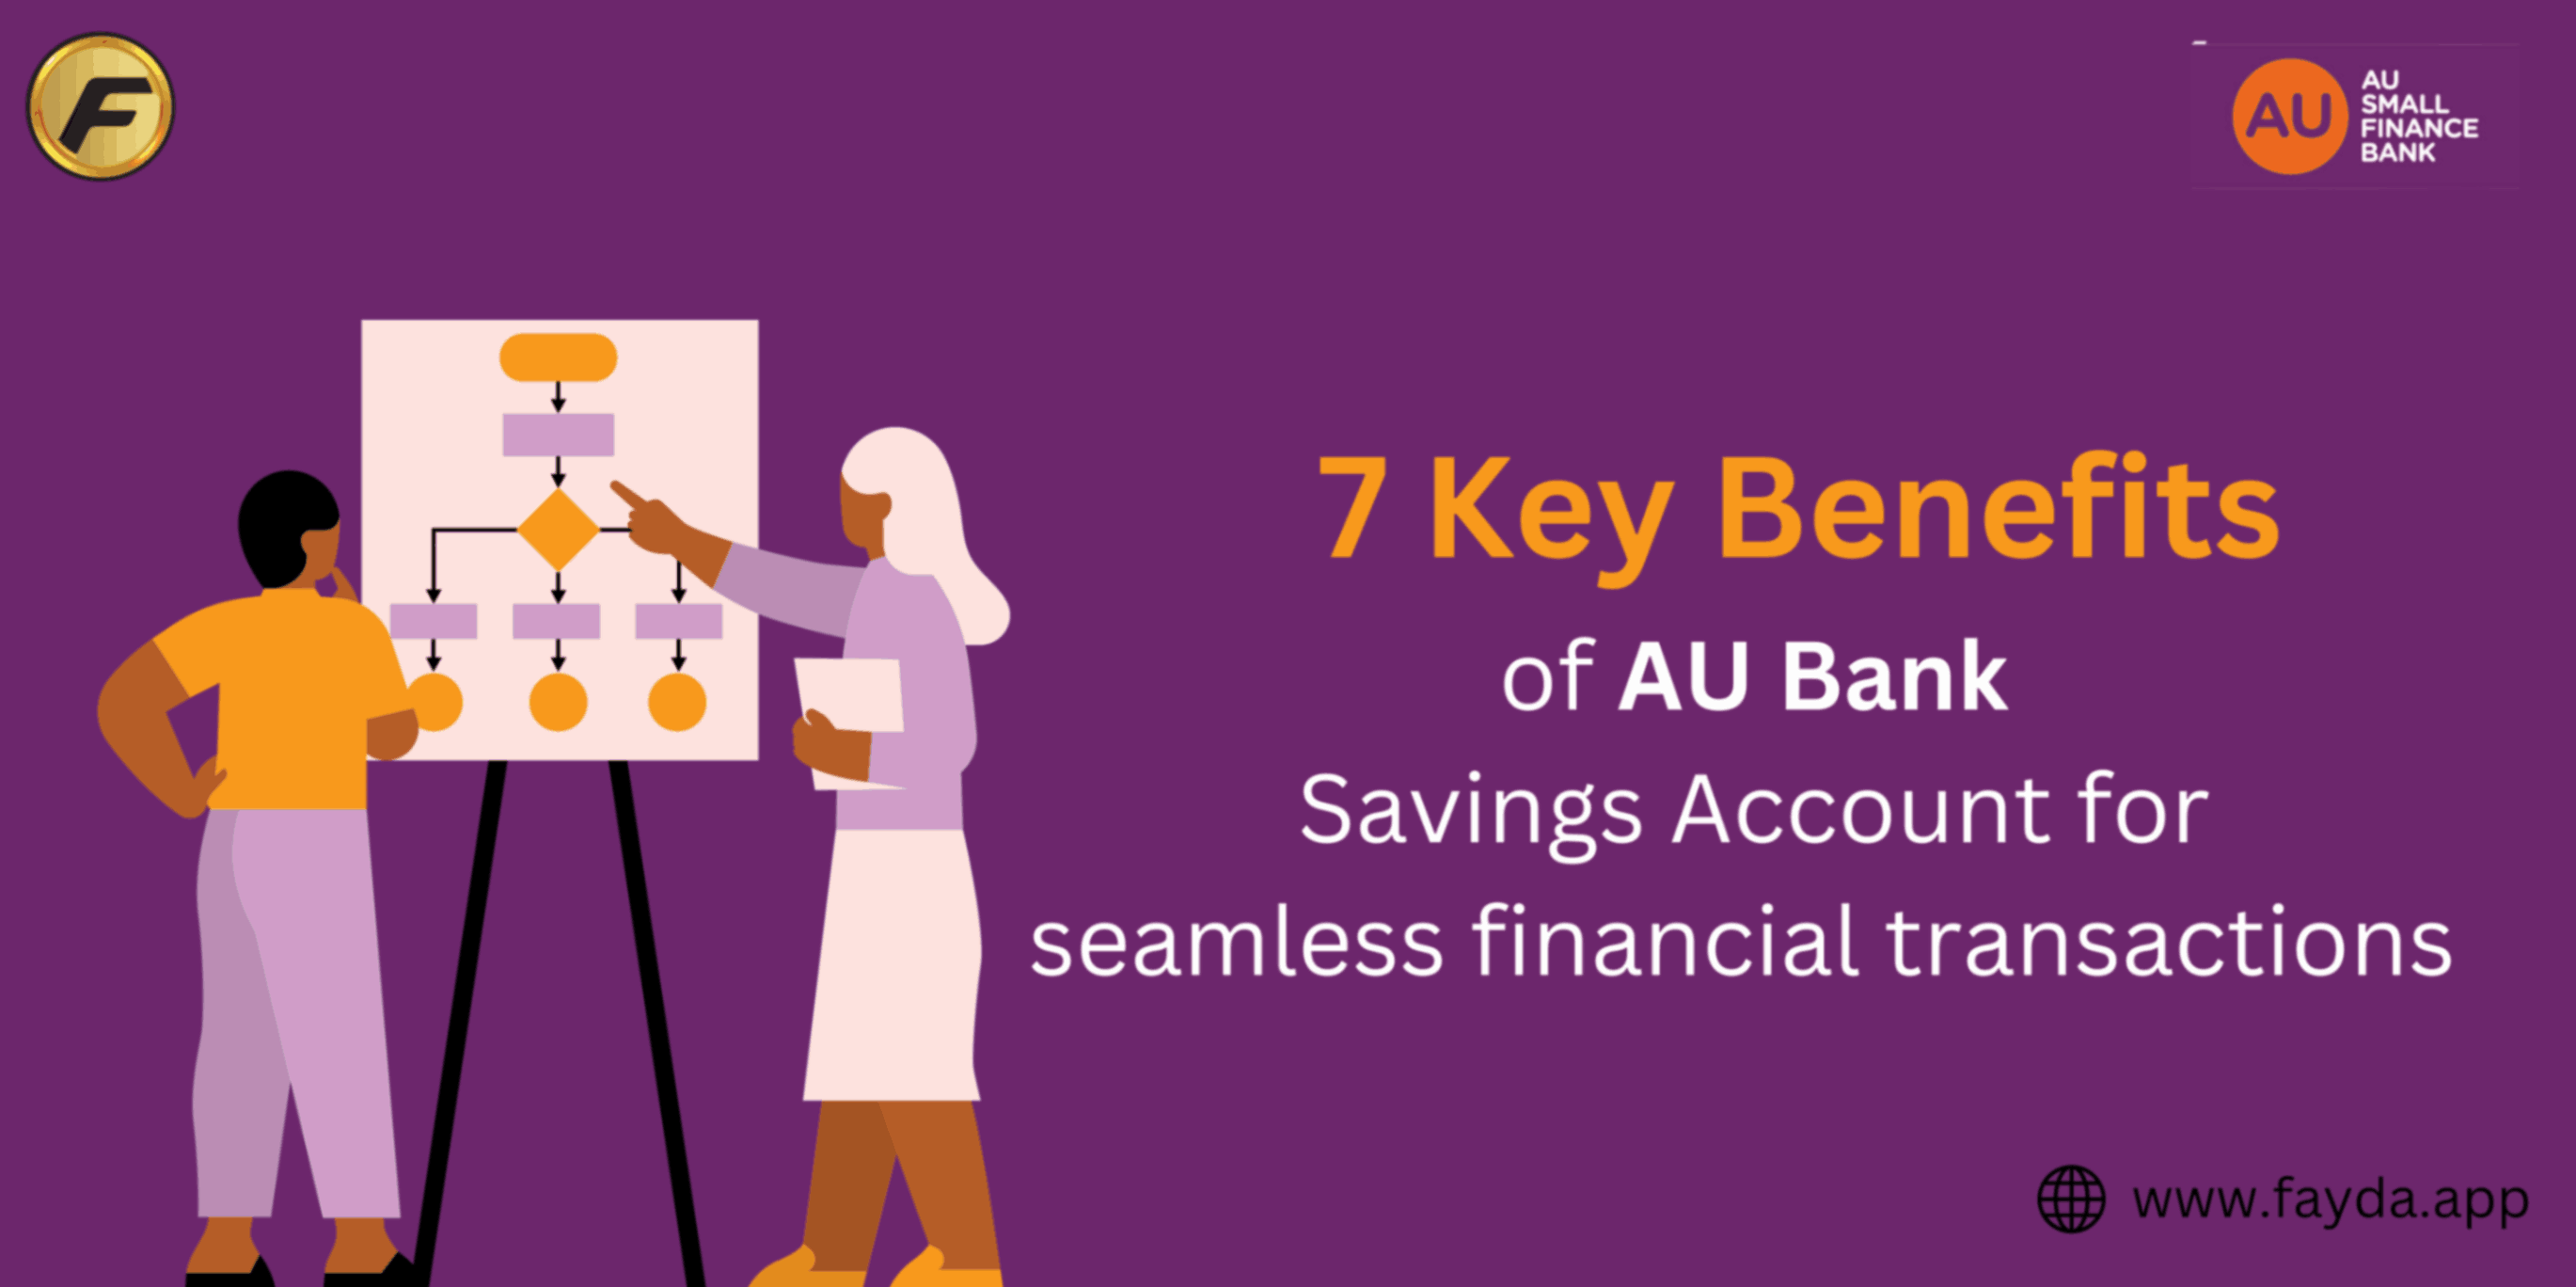 7 Key Benefits of AU Bank Savings Account for seamless financial transactions